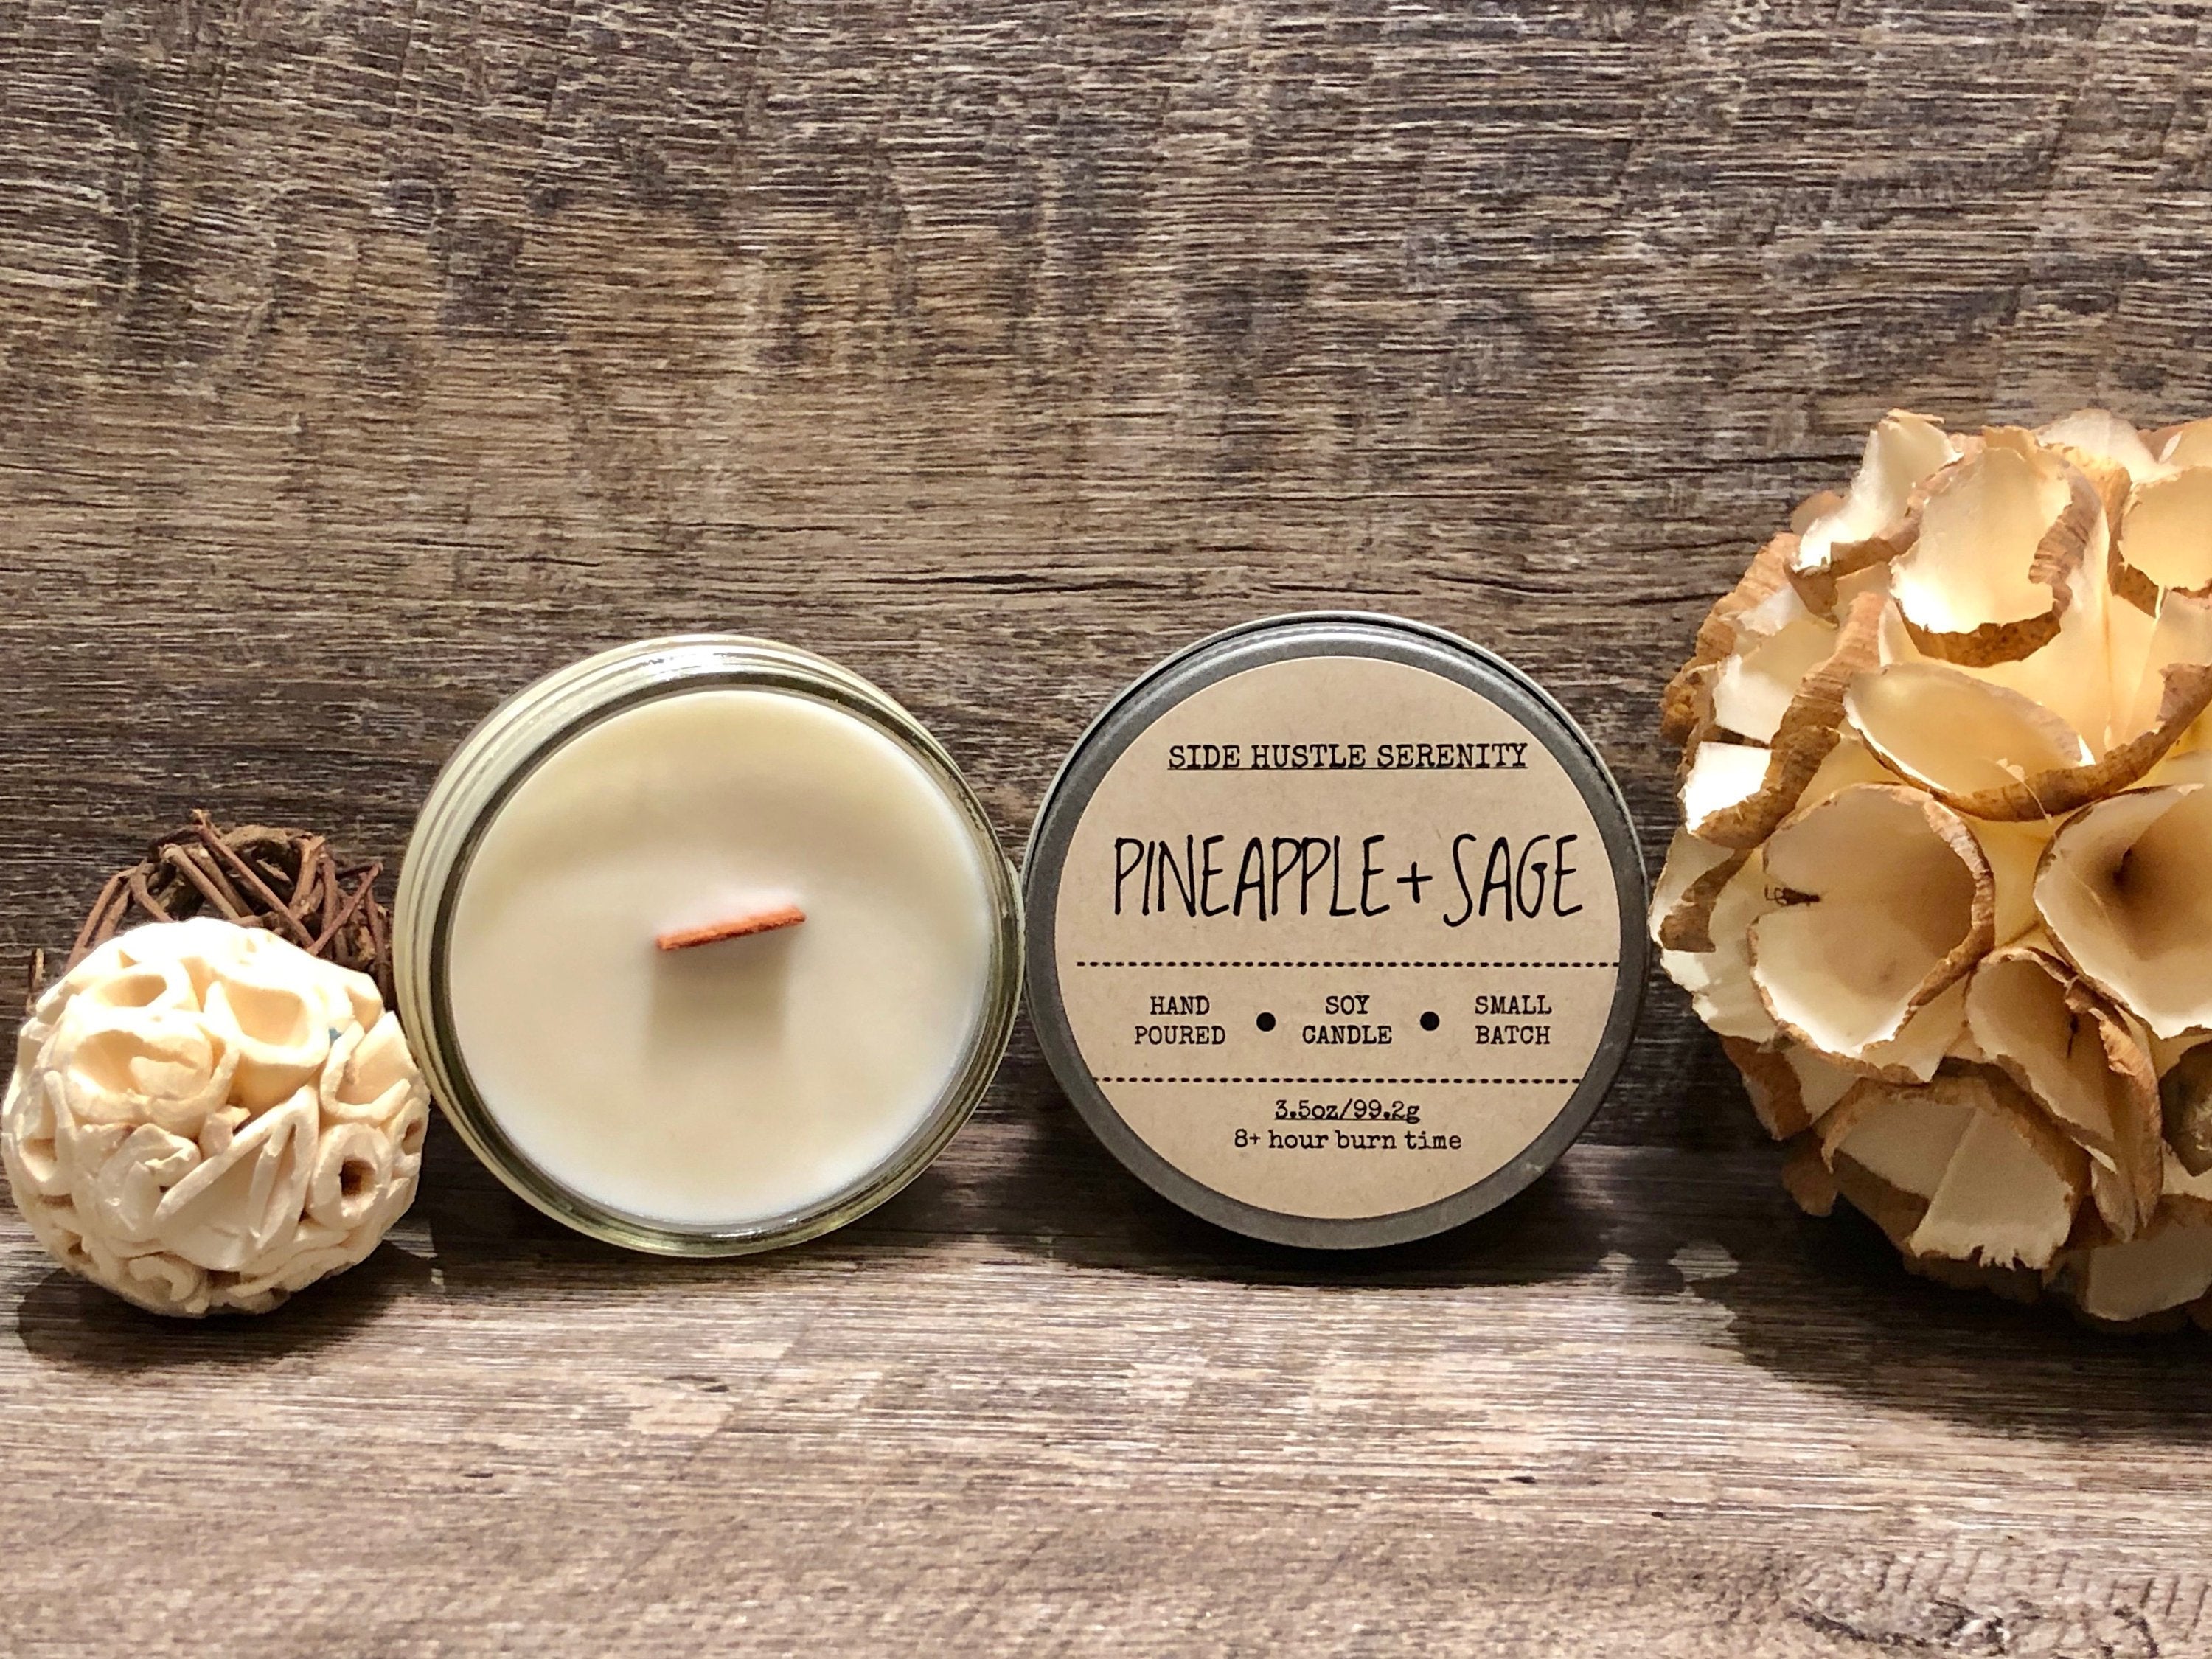 Pineapple + Sage Scented Soy Candle - Side Hustle Serenity